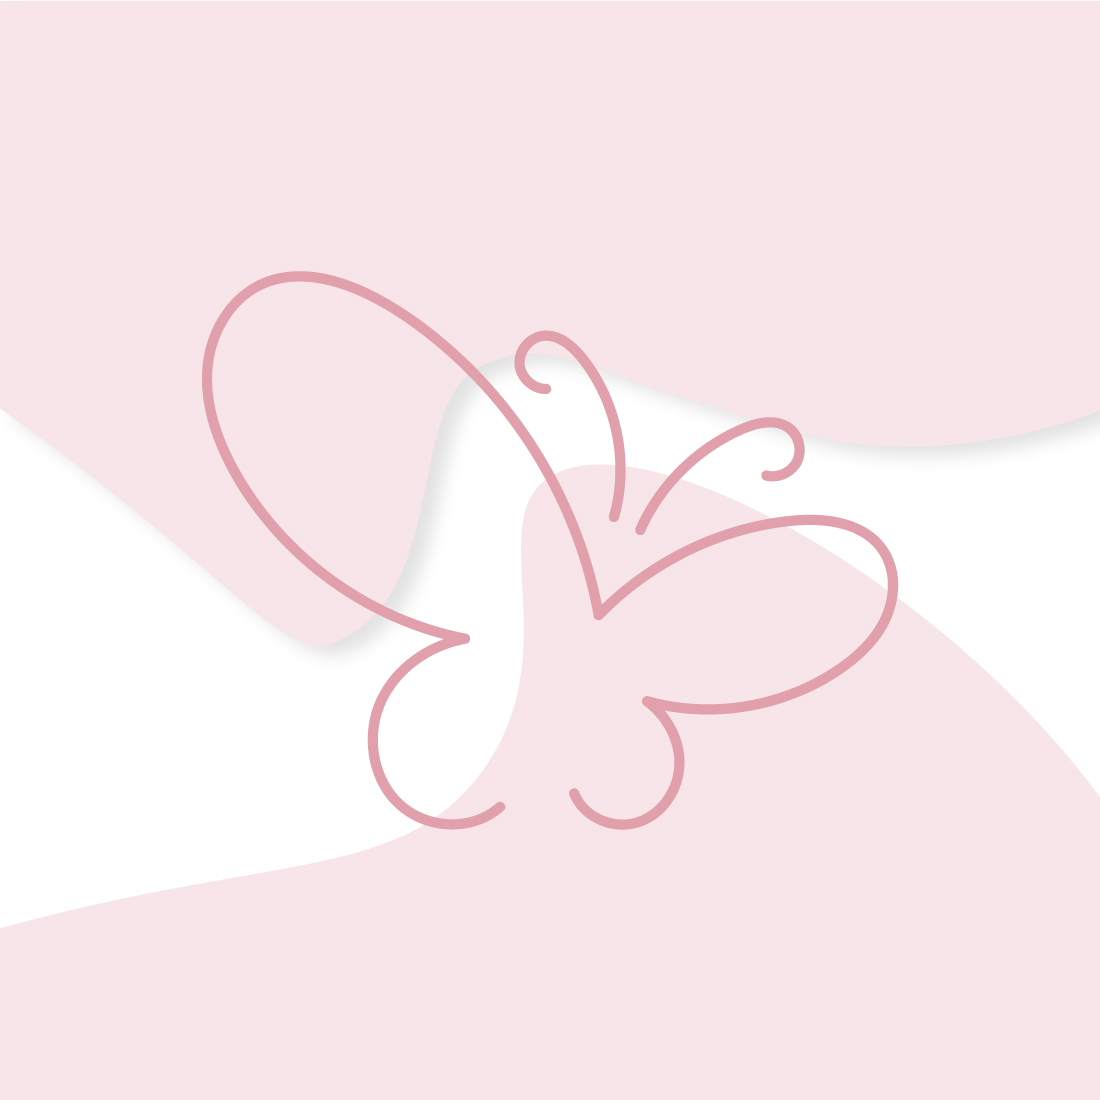 Butterfly logo preview image.